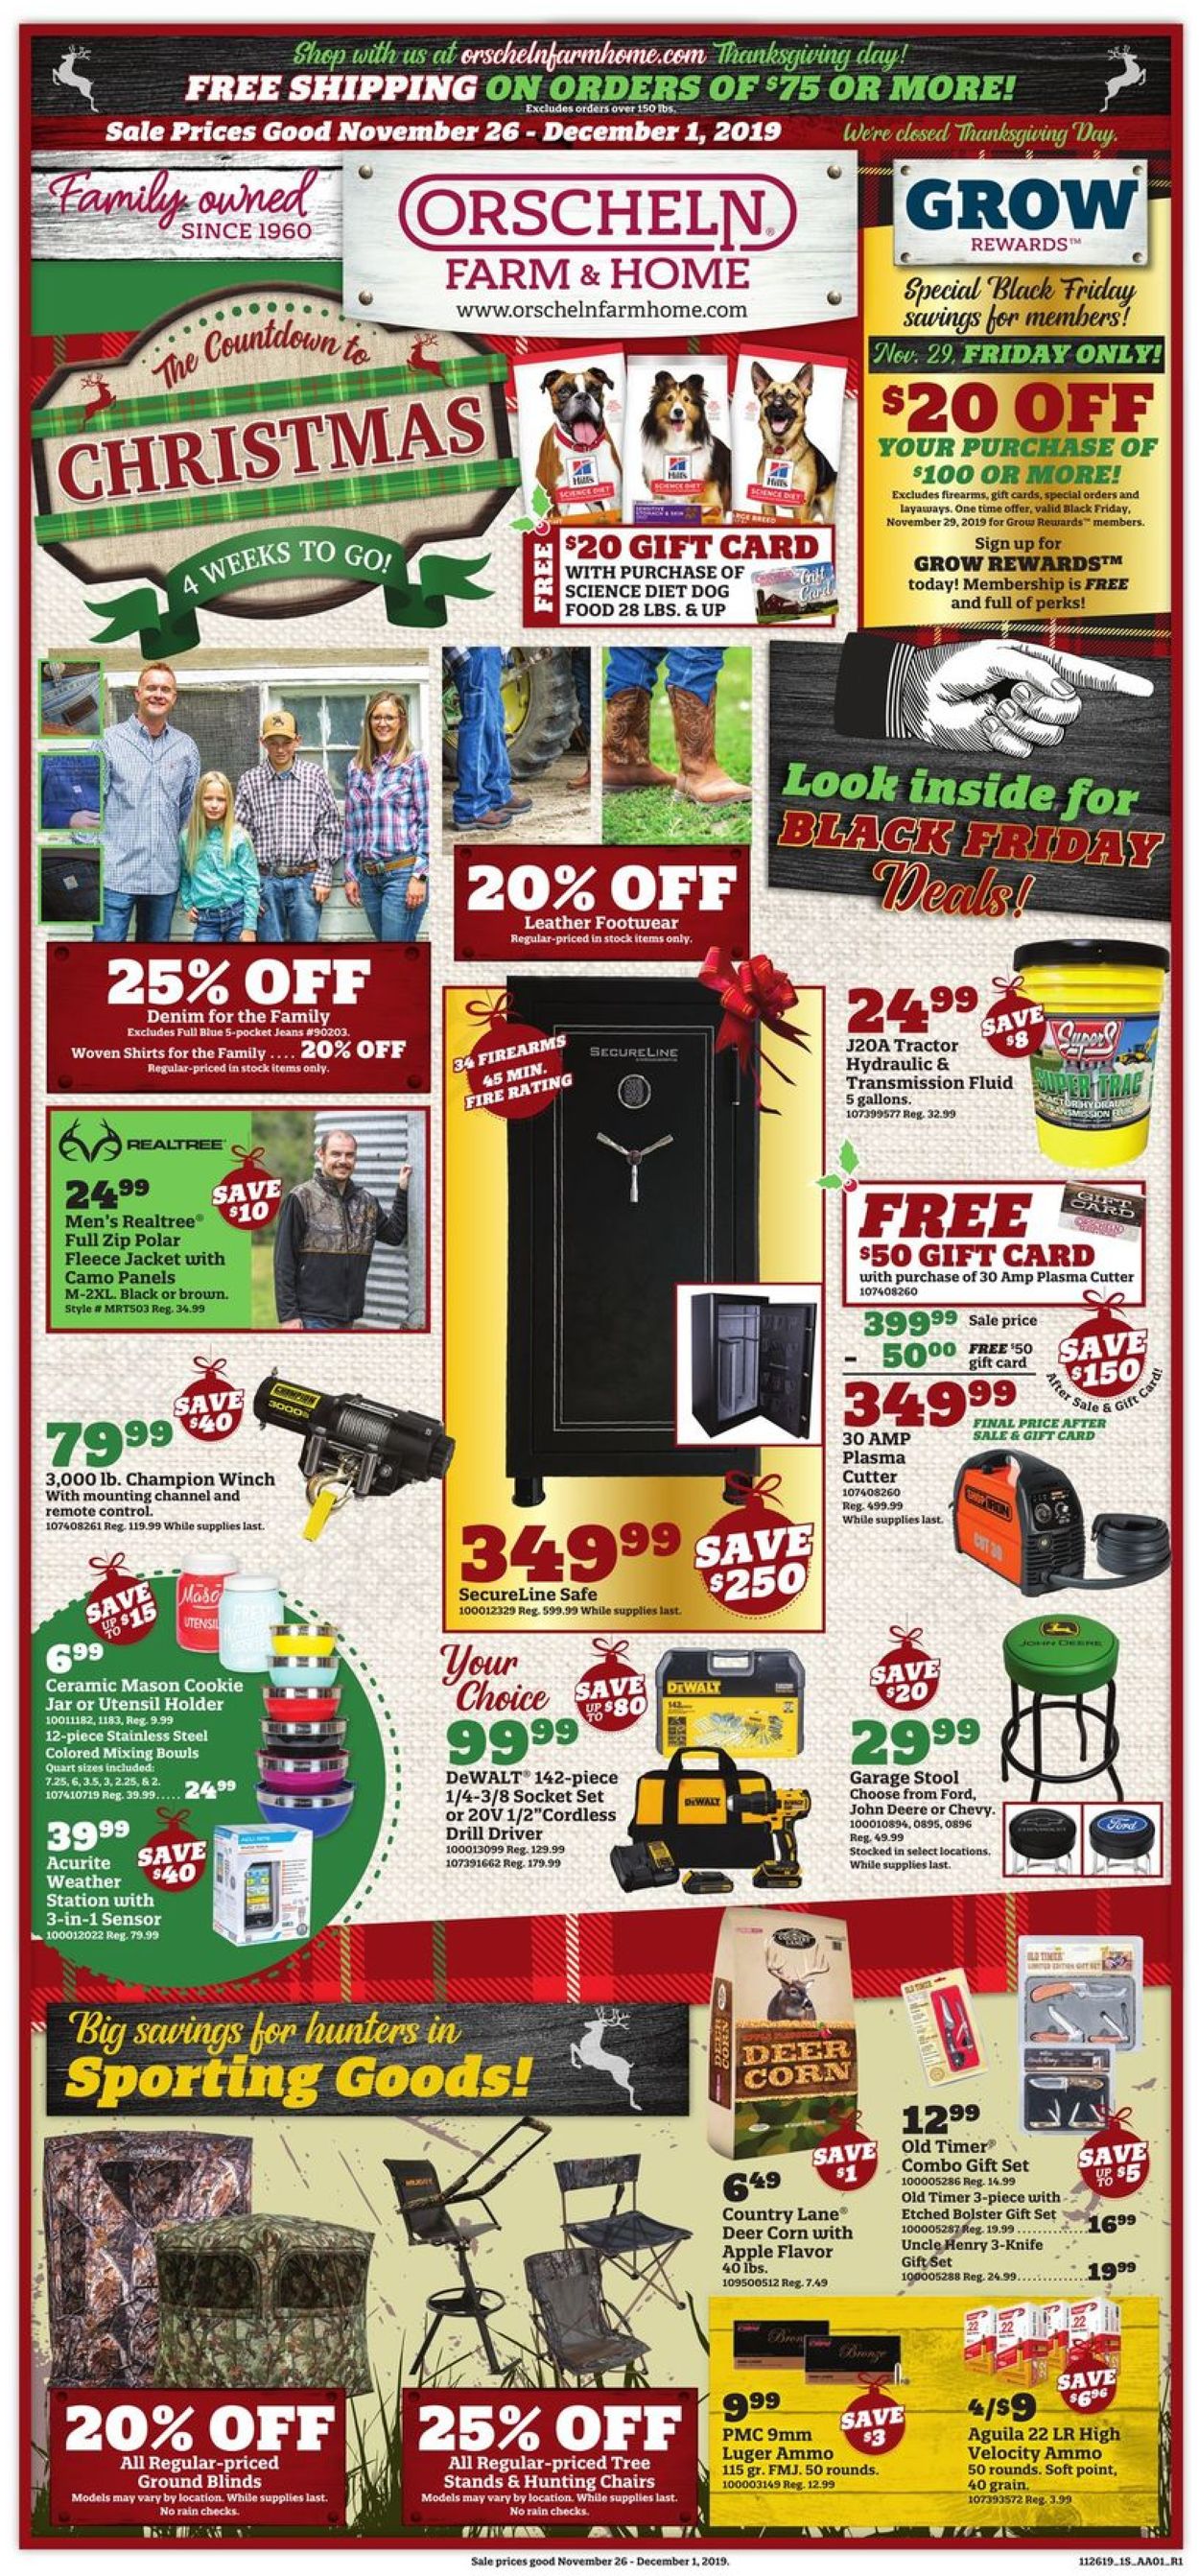 Orscheln Farm and Home Black Friday Ad 2019 Current weekly ad 11/26